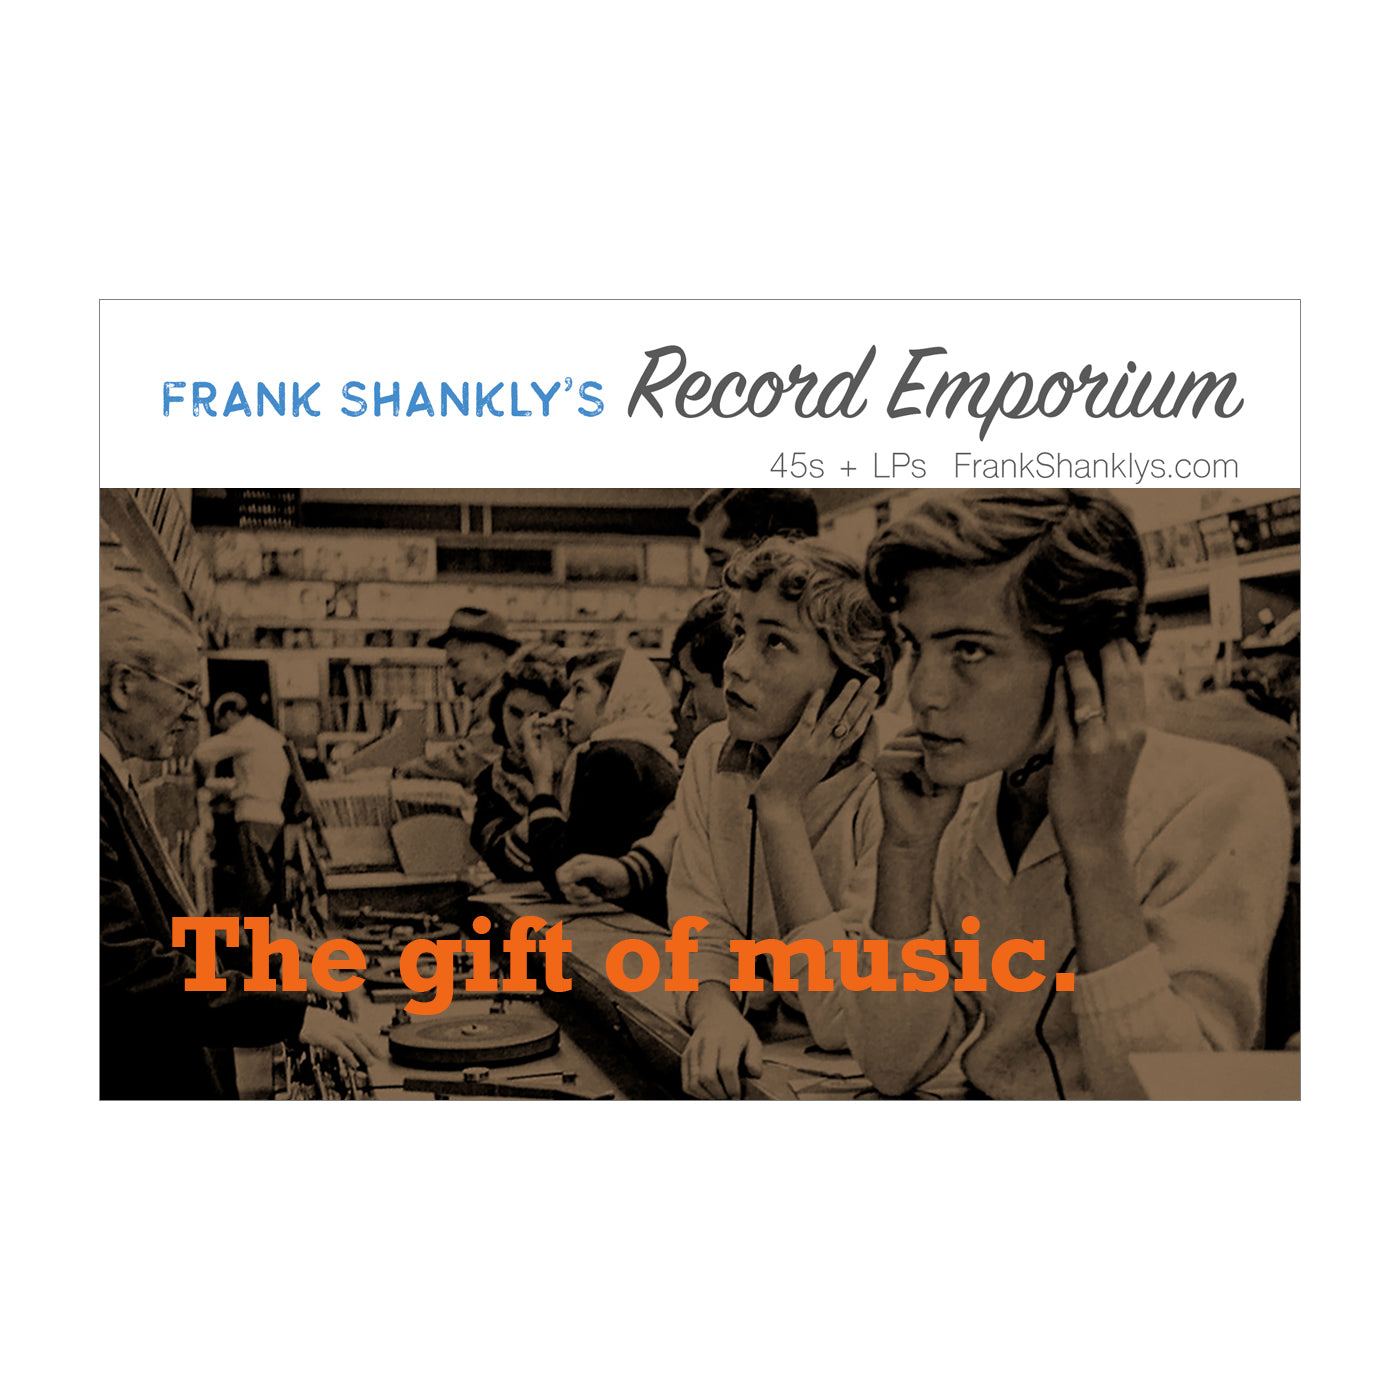 Frank Shankly's Record Emporium Gift Card